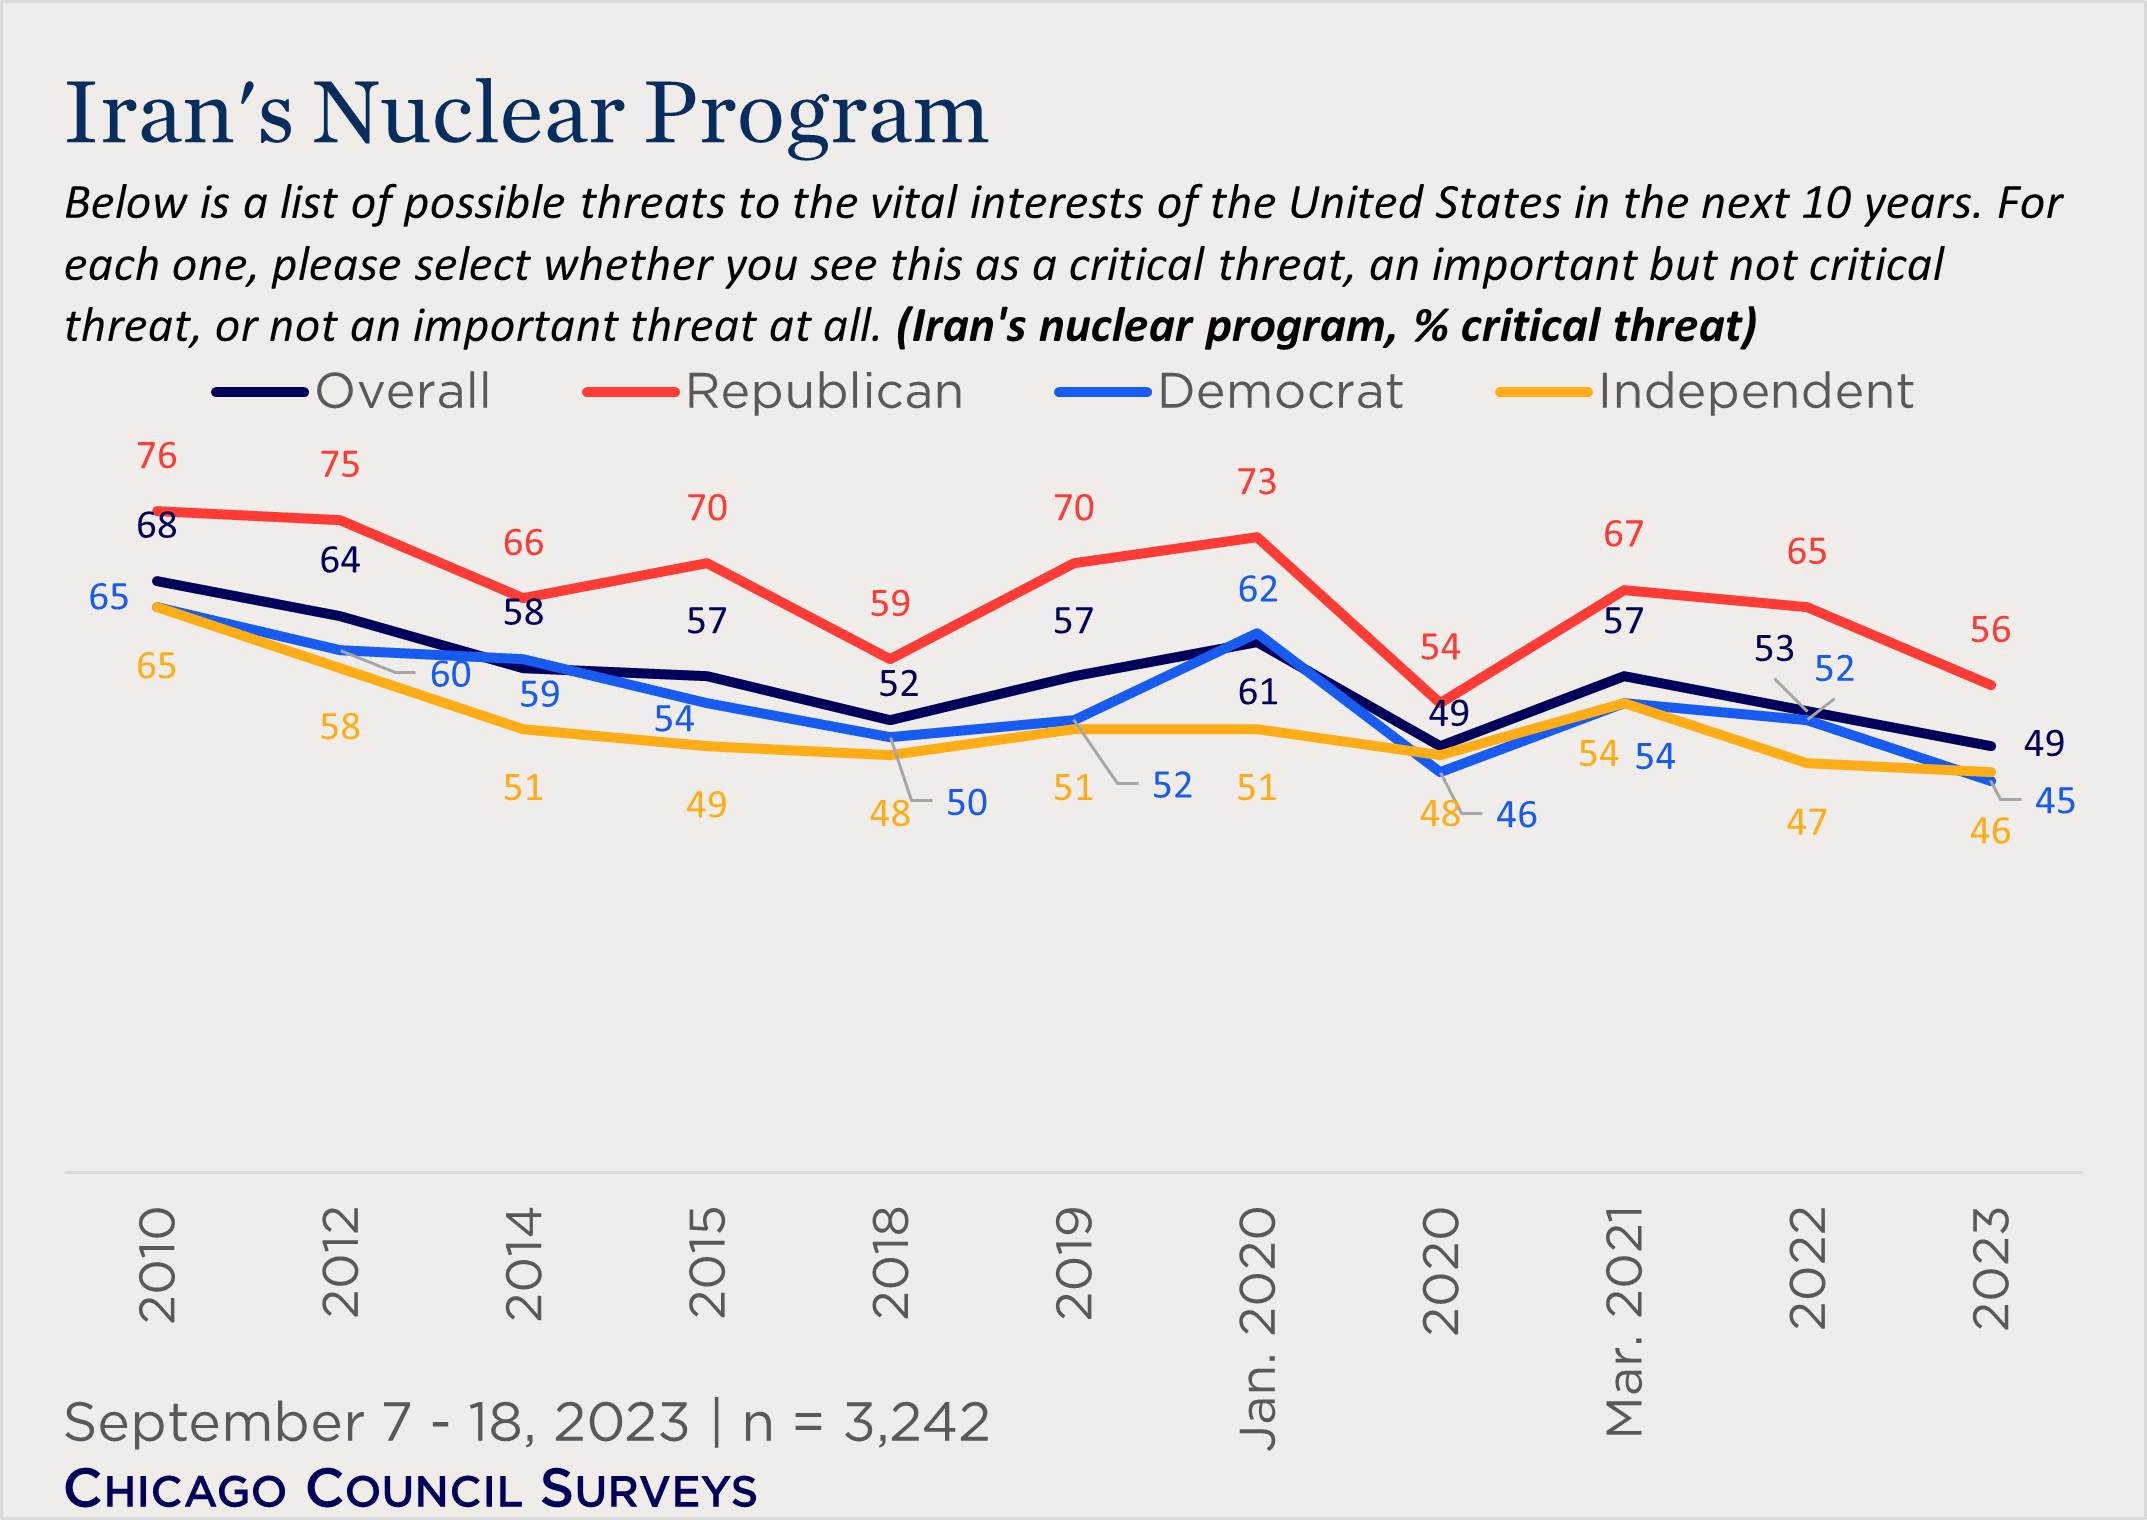 "line chart showing partisan views of Iran's nuclear program as a critical threat over time"